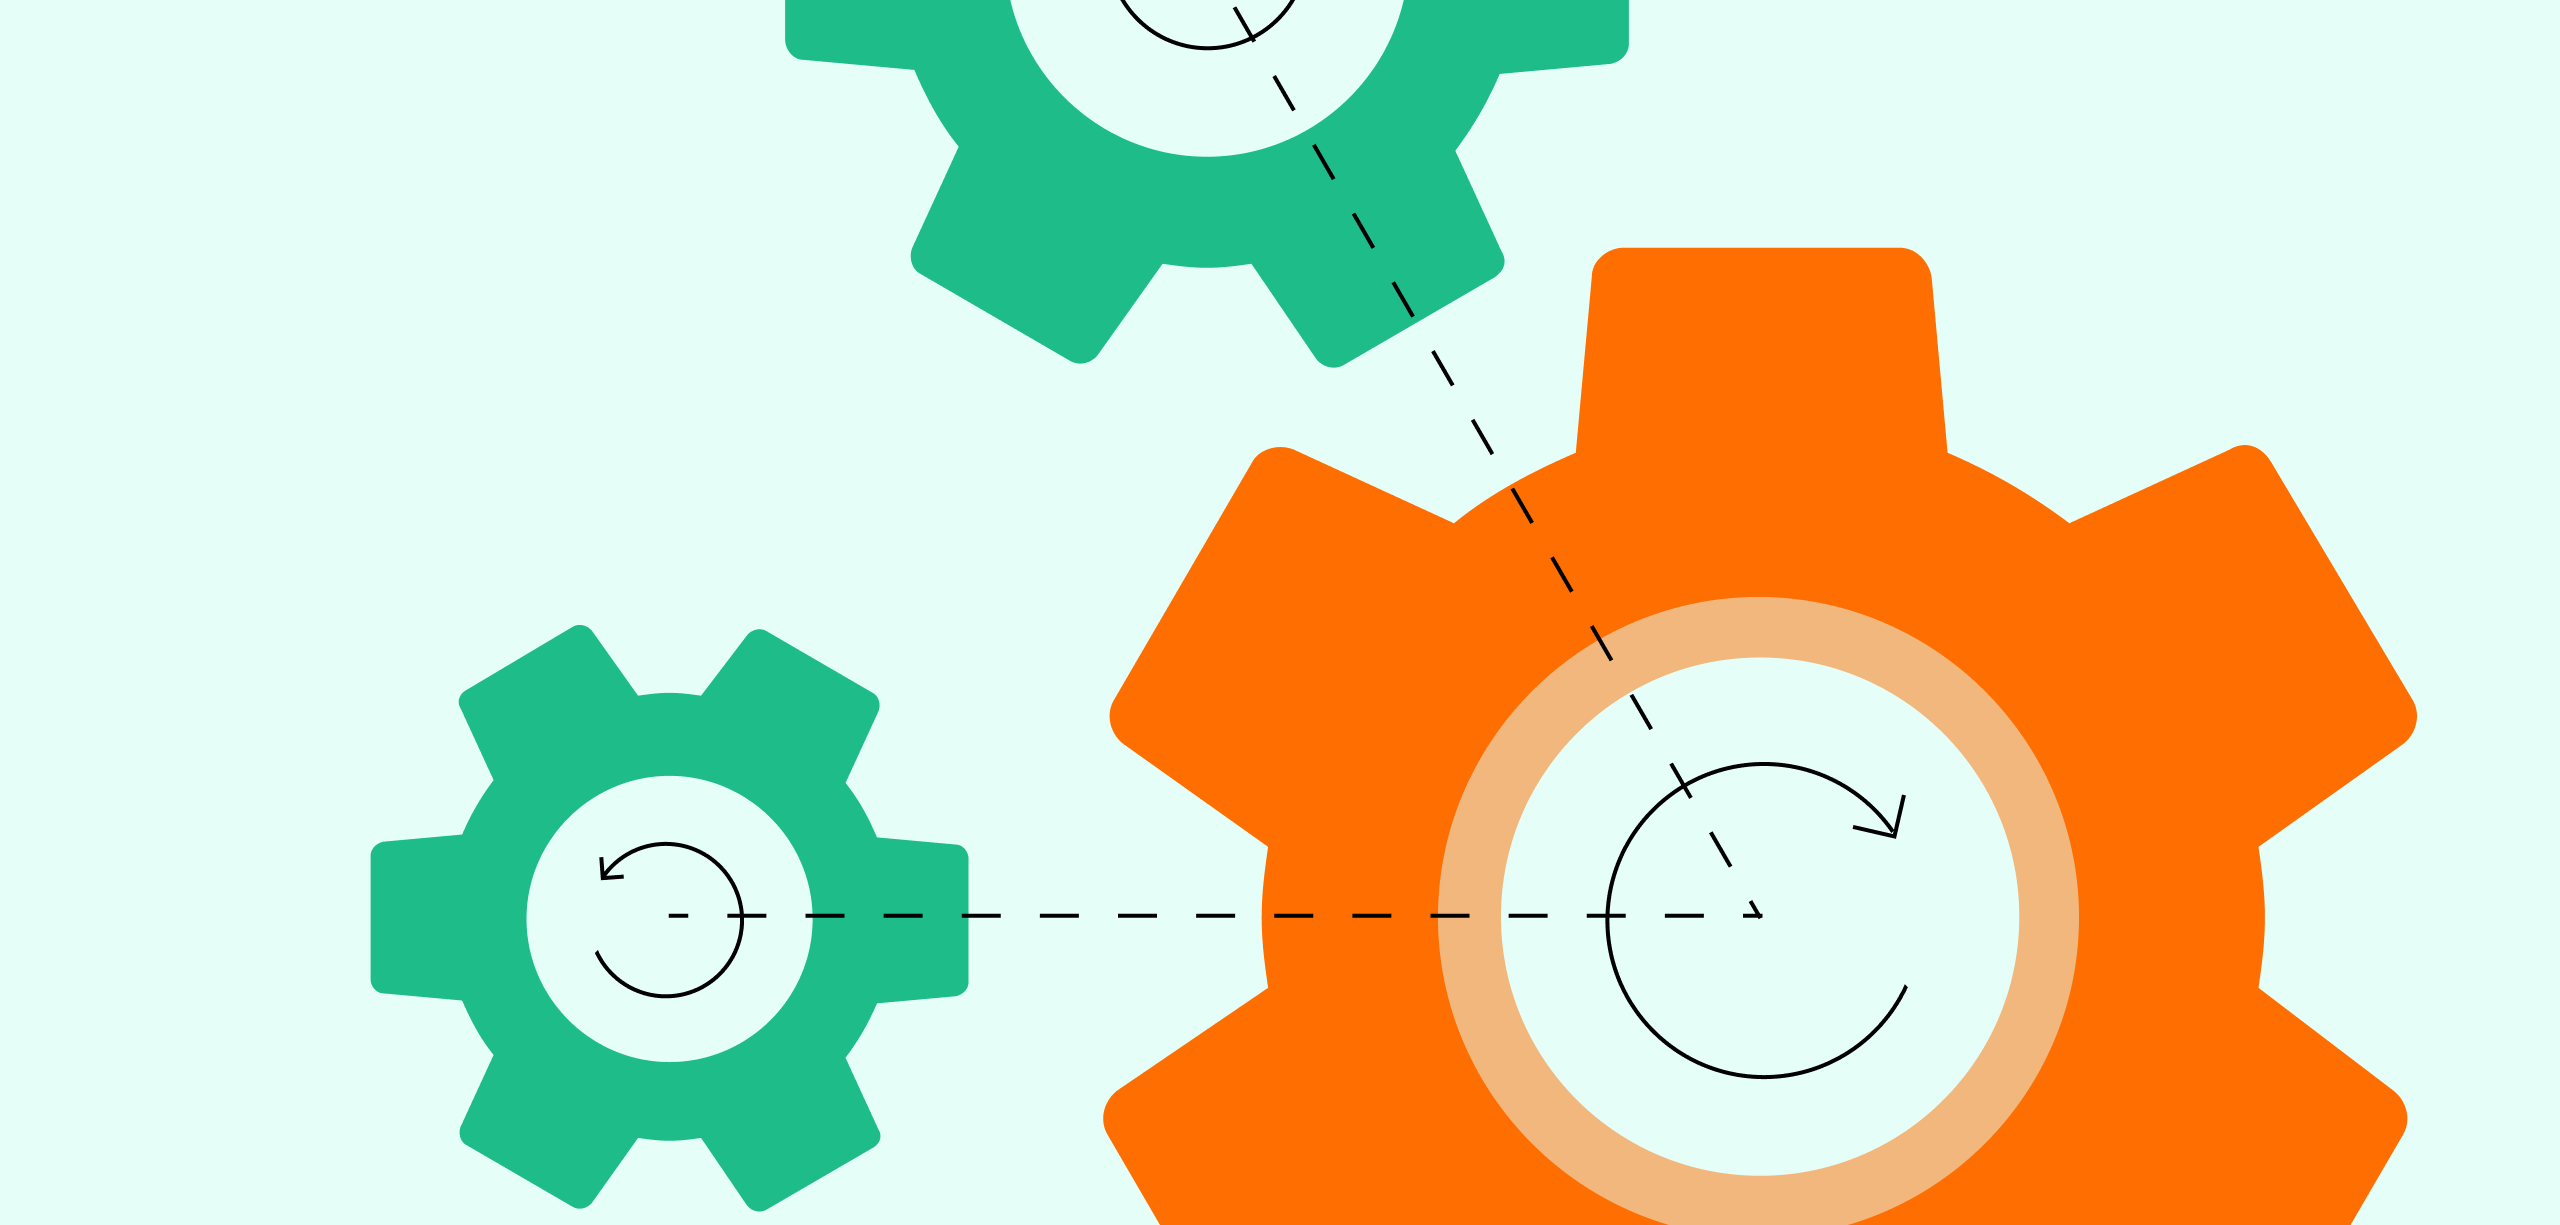 What do design systems and cogwheels have in common?